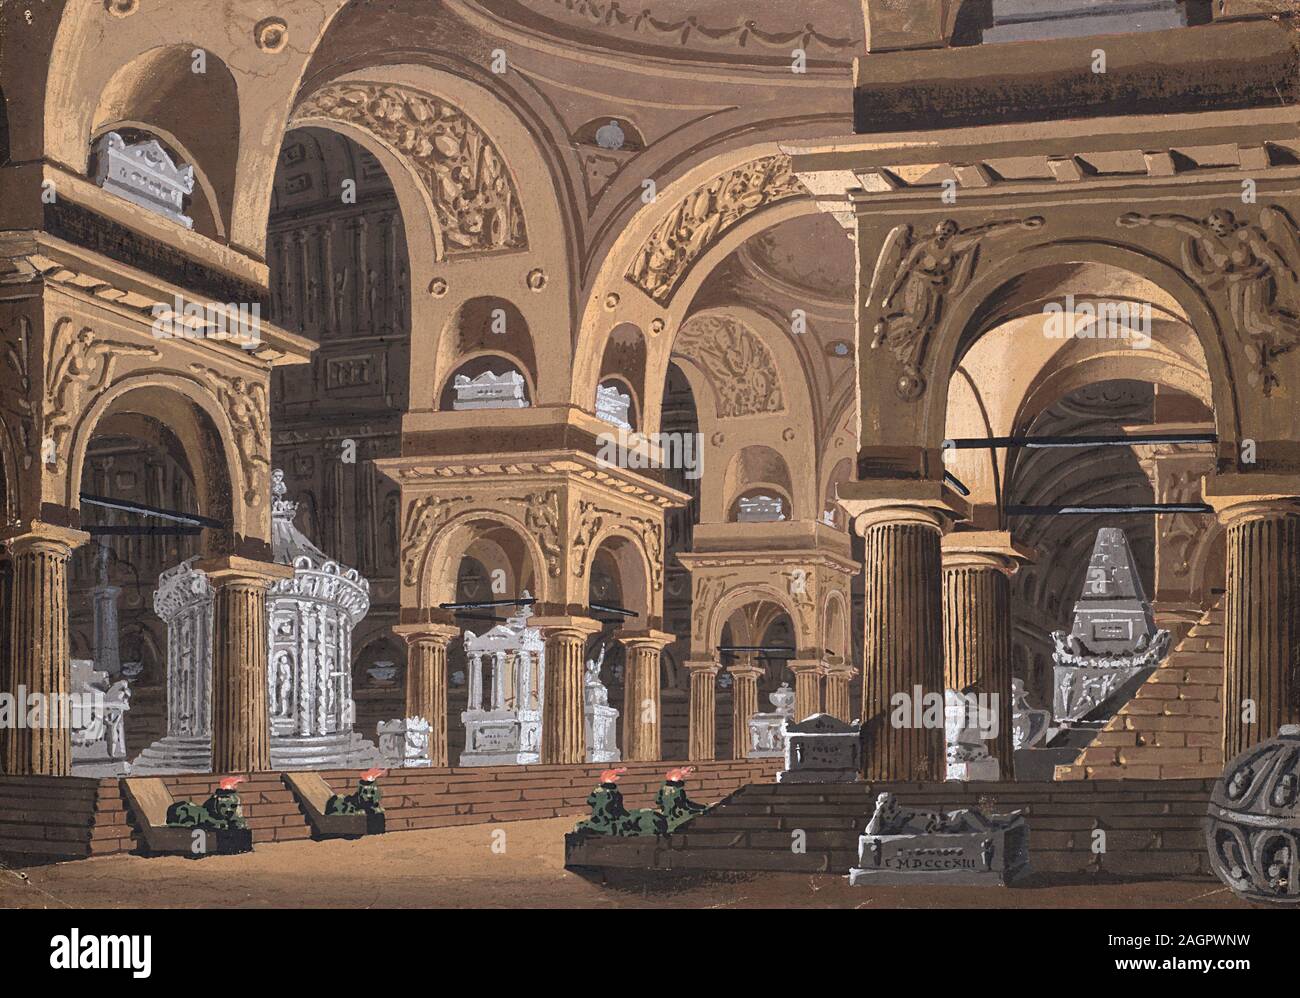 Stage design for the opera 'Castore e Polluce' by Francesco Bianchi. Museum: PRIVATE COLLECTION. Author: ALESSANDRO SANQUIRICO. Stock Photo